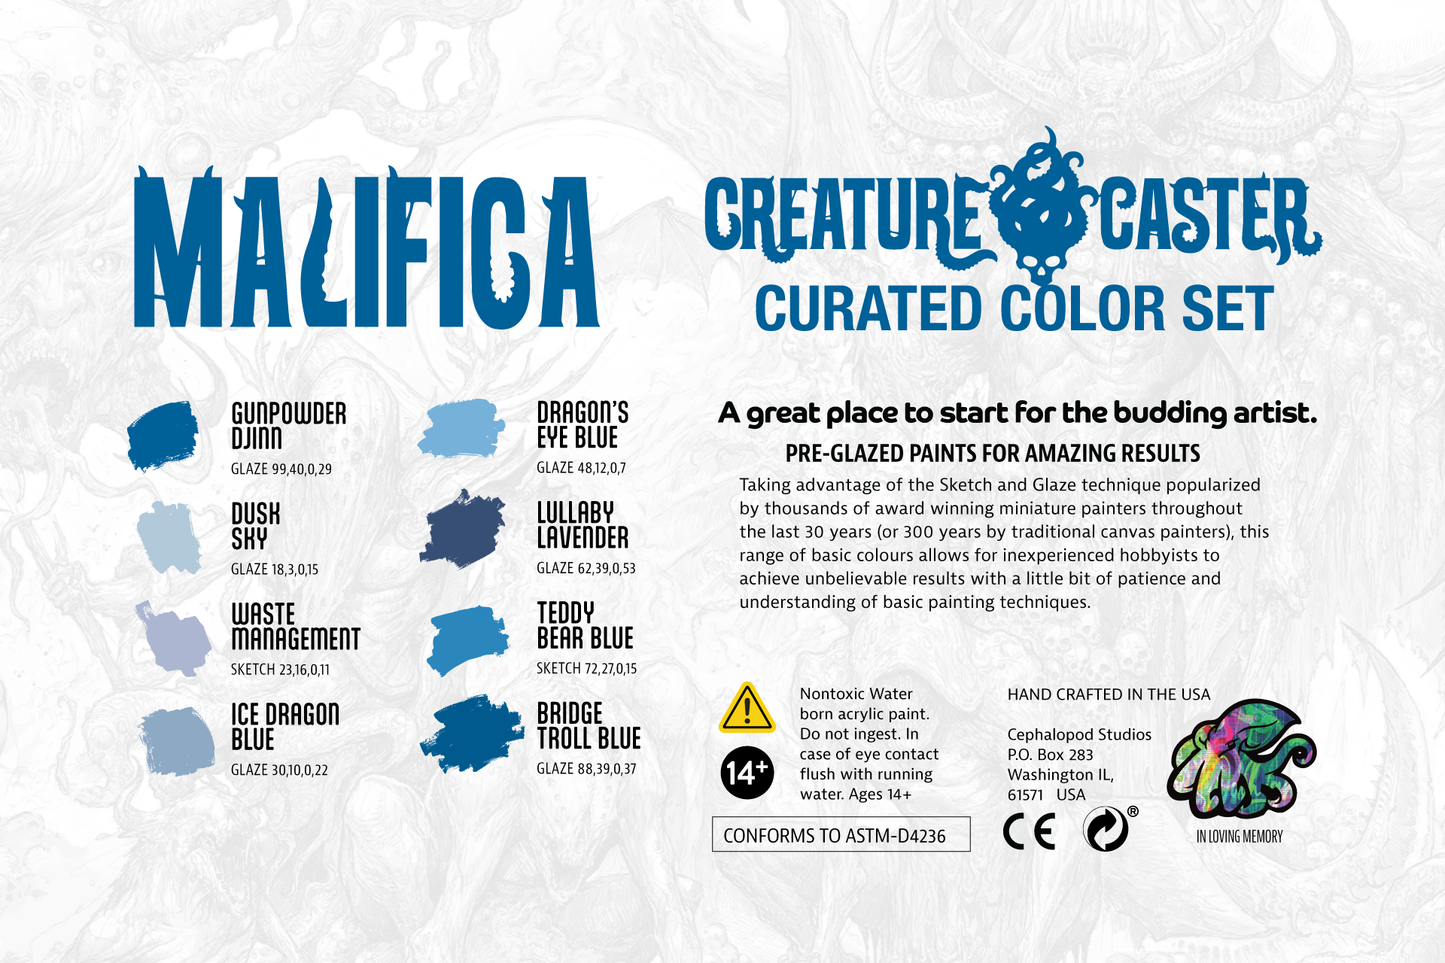 Malifica - Curated Color Set